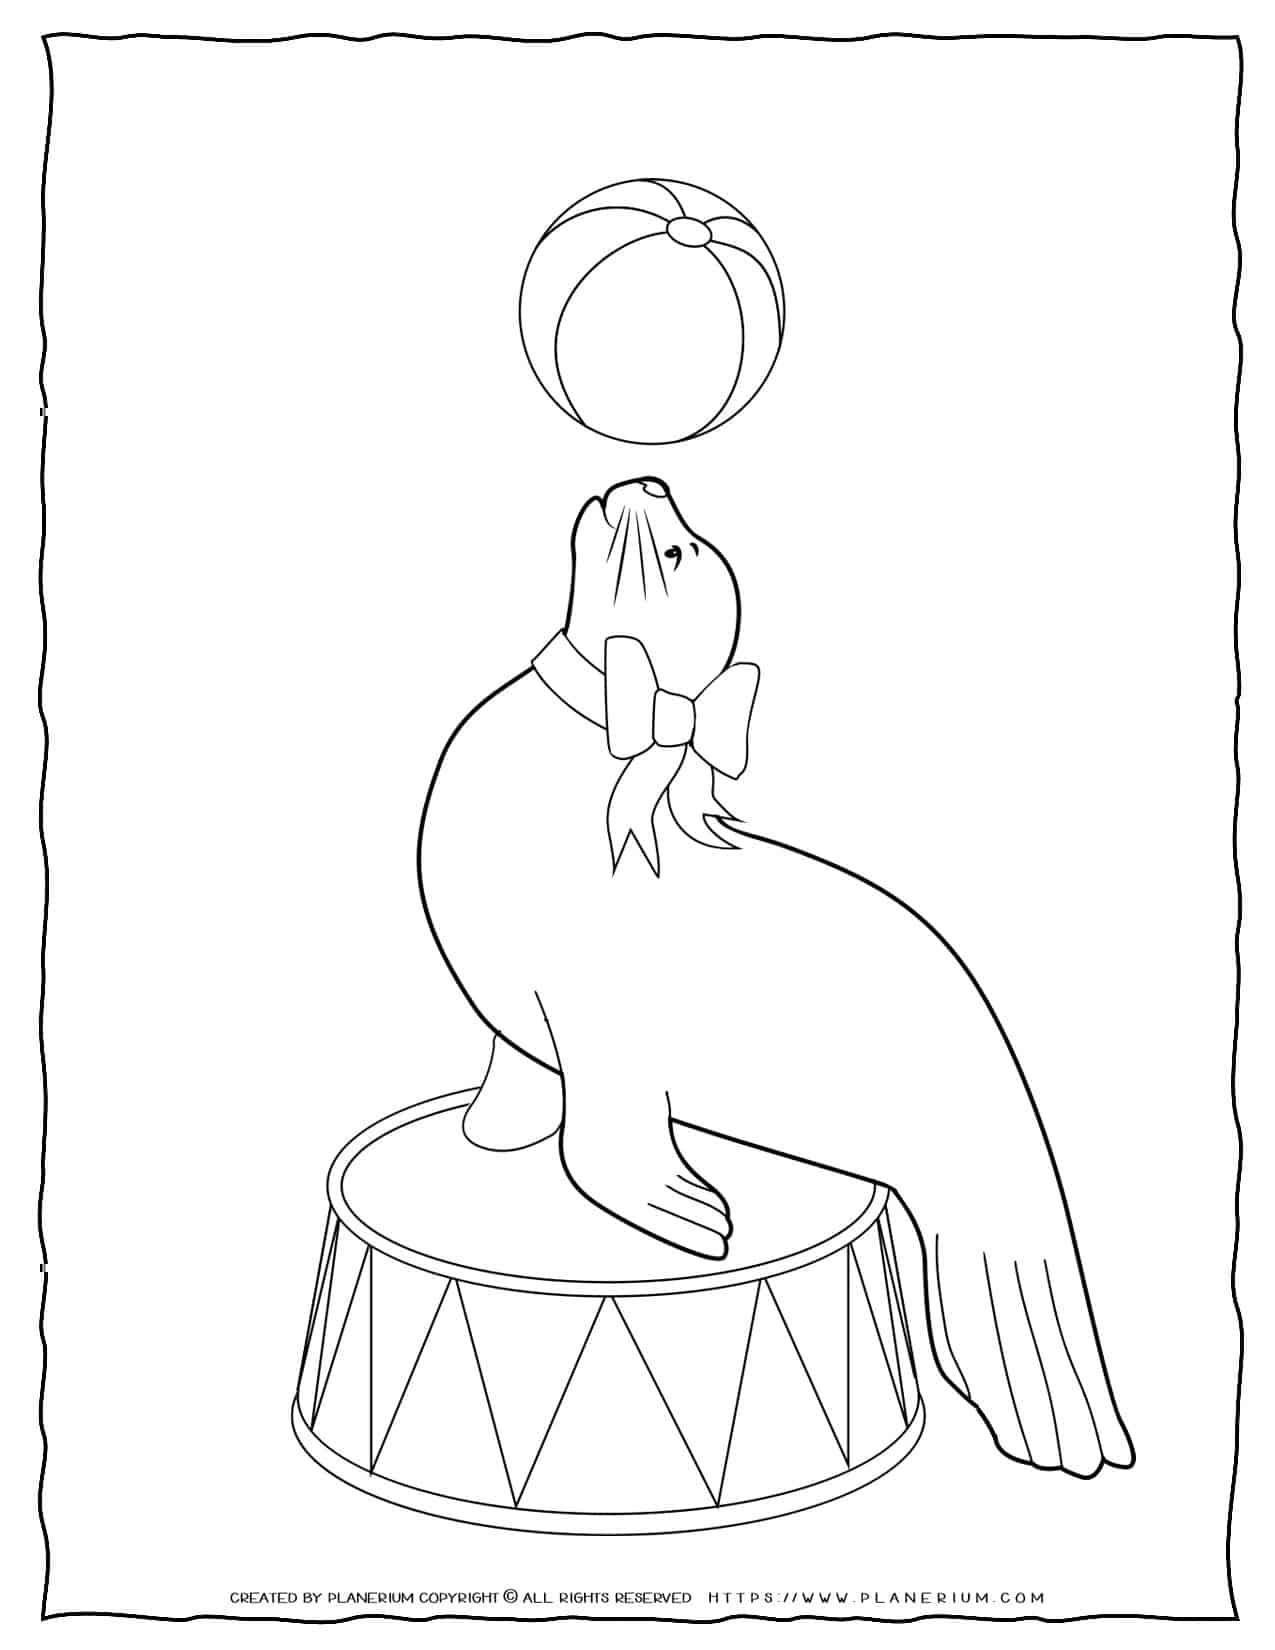 Circus Coloring Page - Seal with a Ball | Planerium